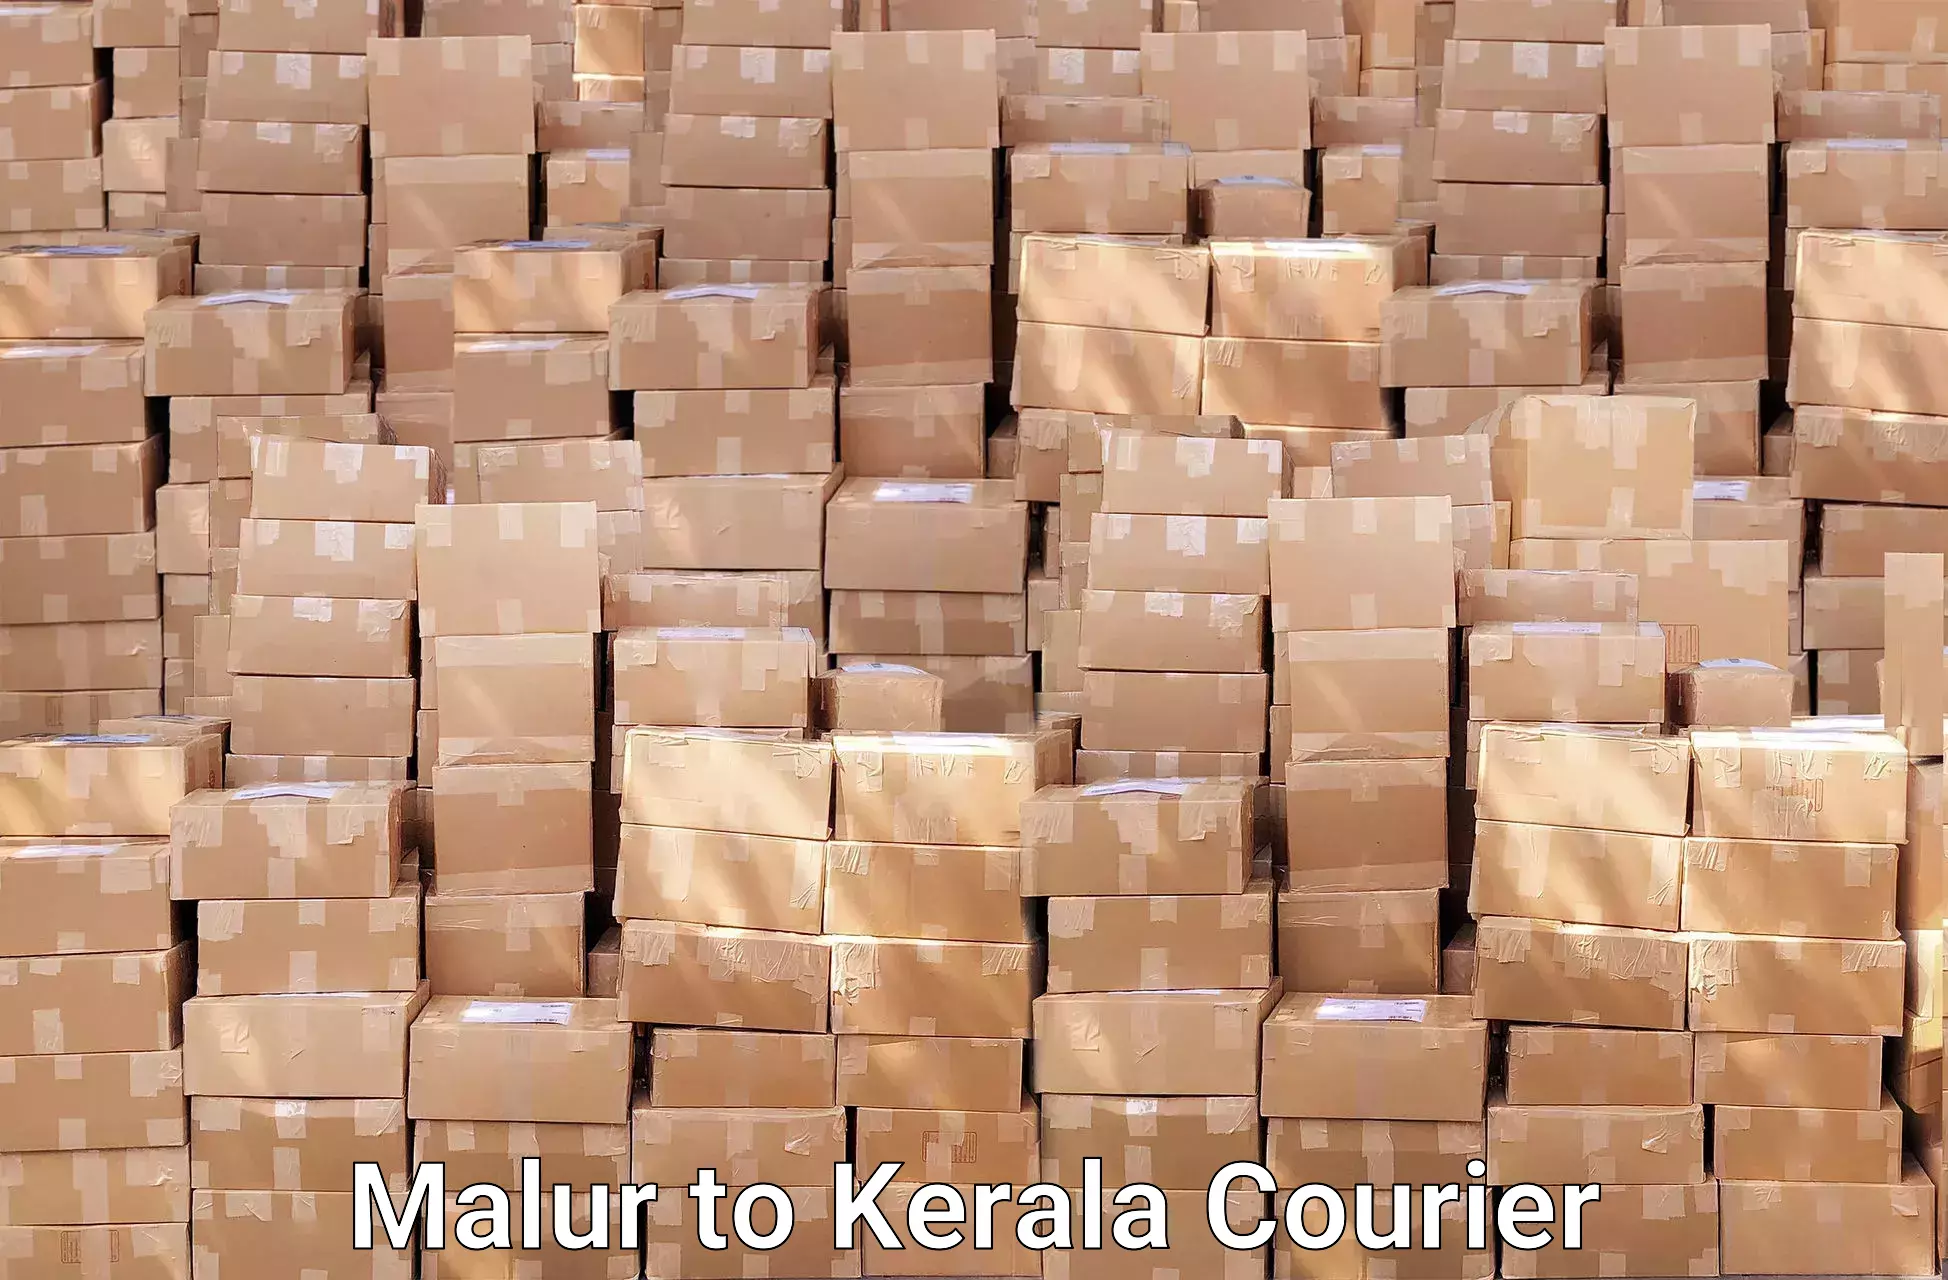 Furniture delivery service Malur to Kerala